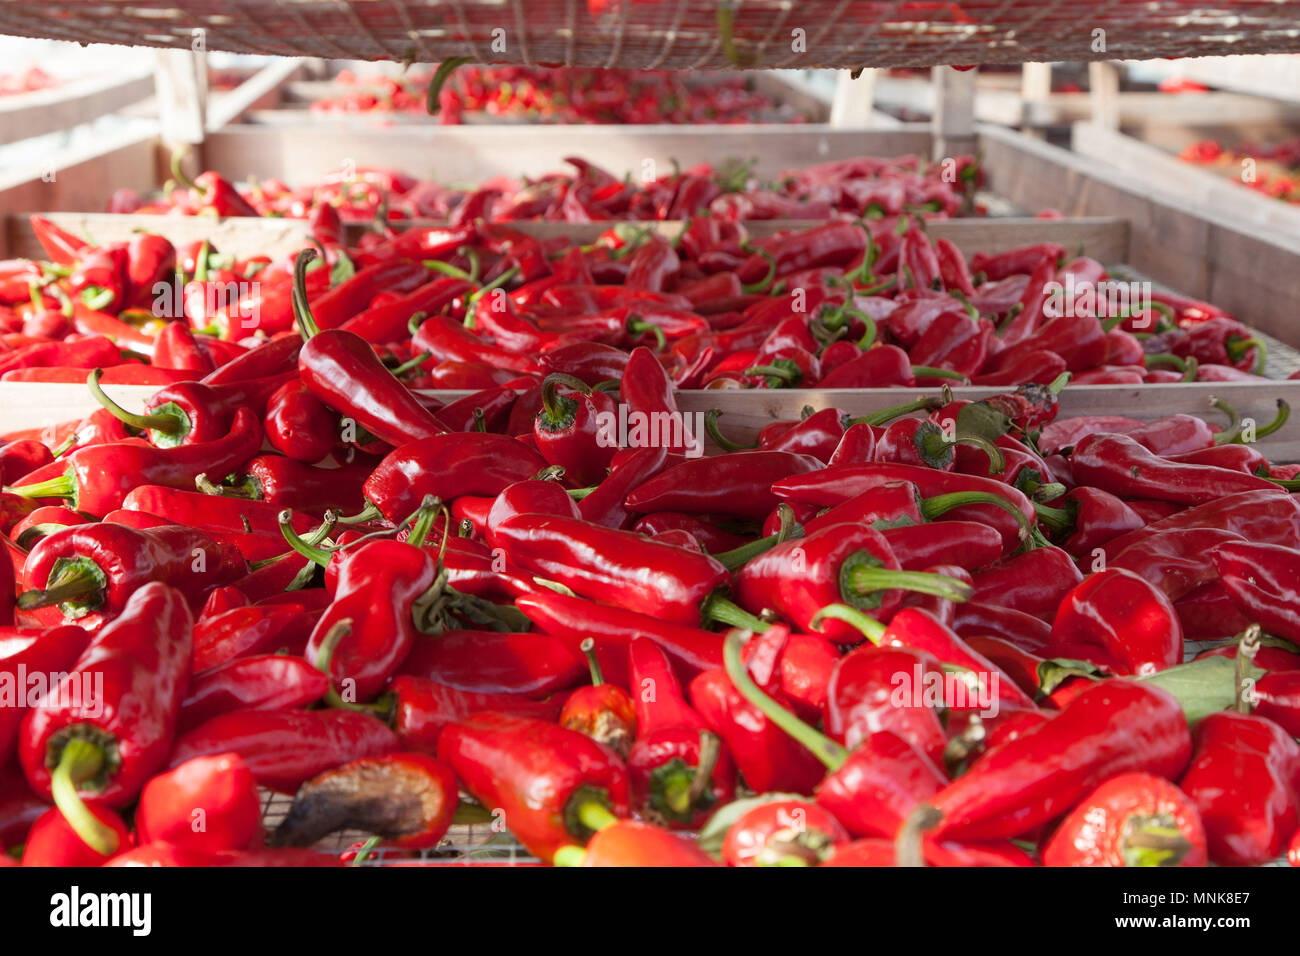 Drying of Espelette chilli peppers (Nouvelle-Aquitaine, southwestern France) at the 'Atelier du Piment' Pepper Workshop Stock Photo